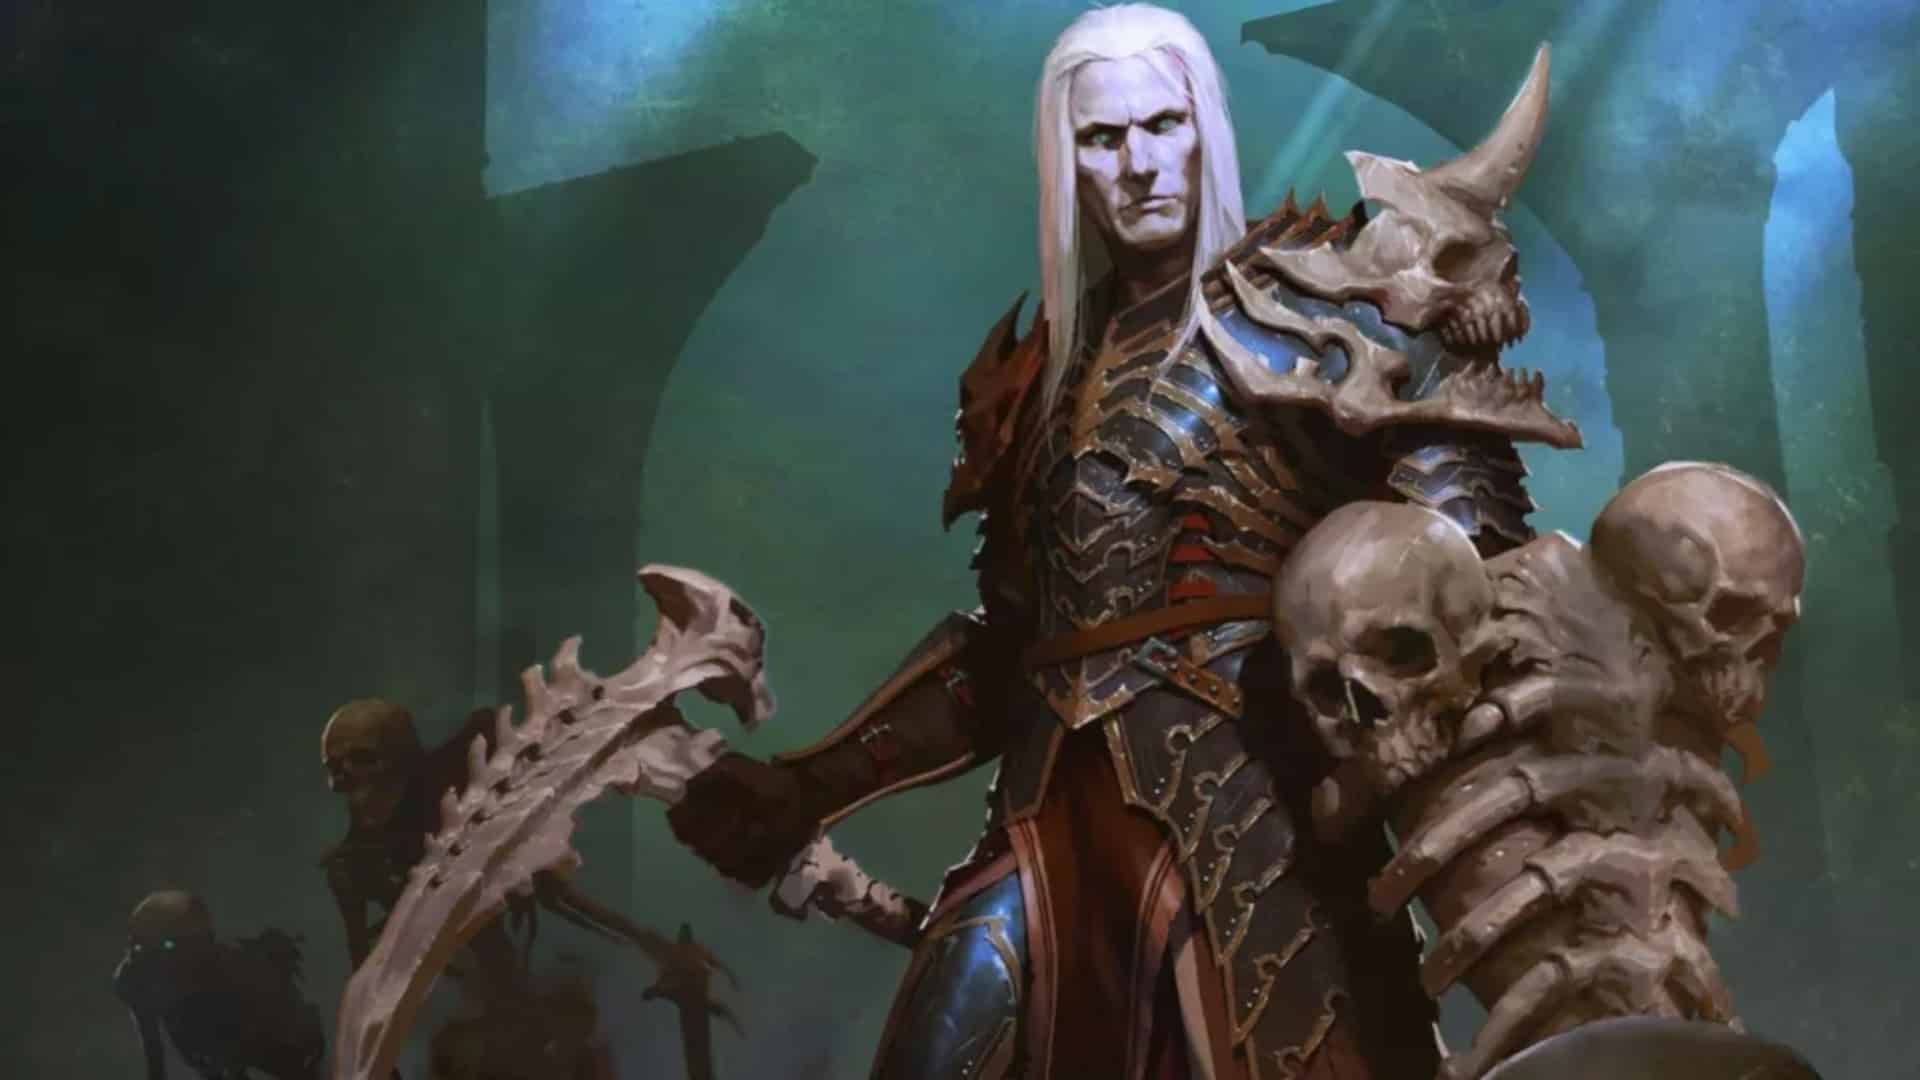 blizzard-defends-diablo-immortal-microtransactions-says-most-players-are-not-spending-money-GamersRD